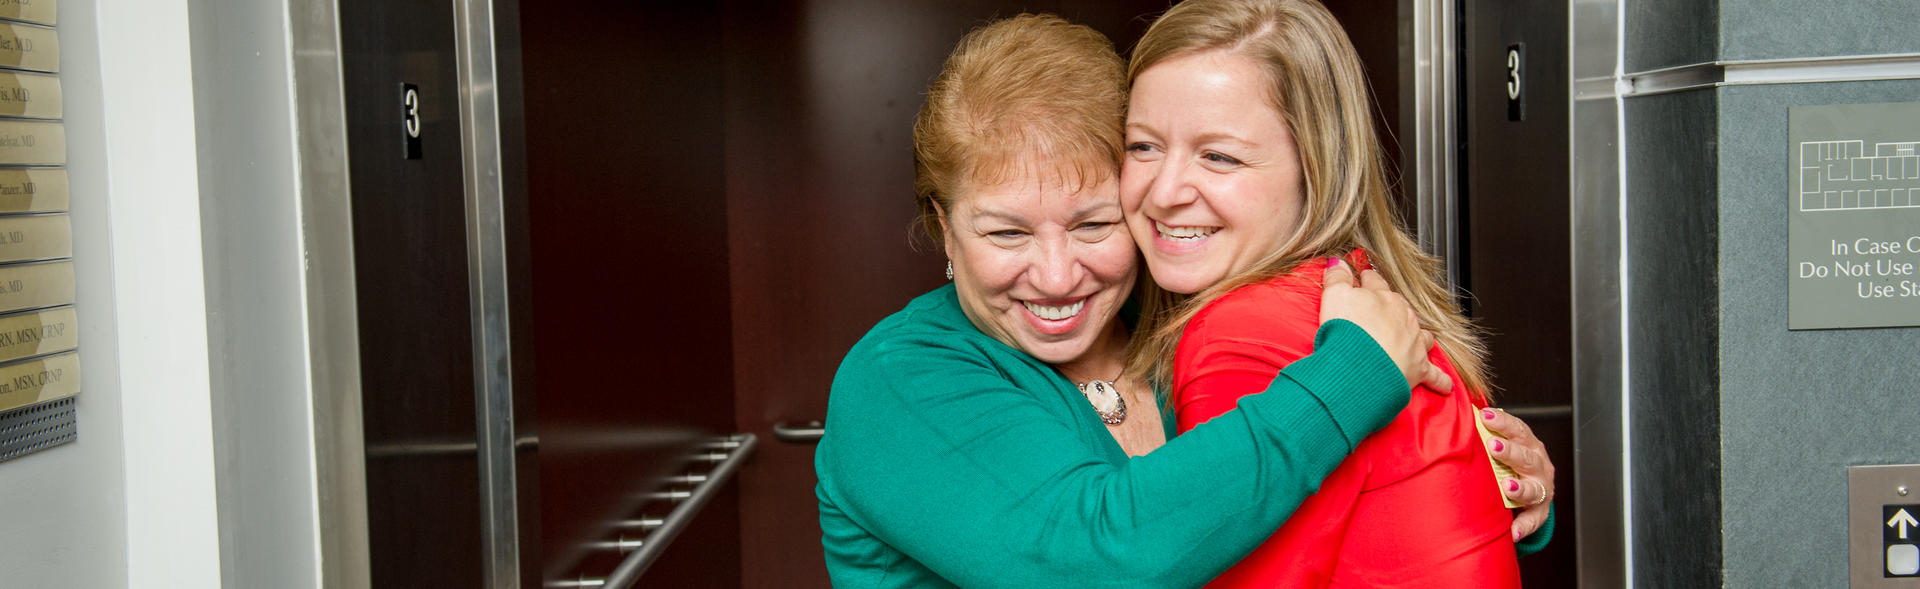 Two women hugging happily